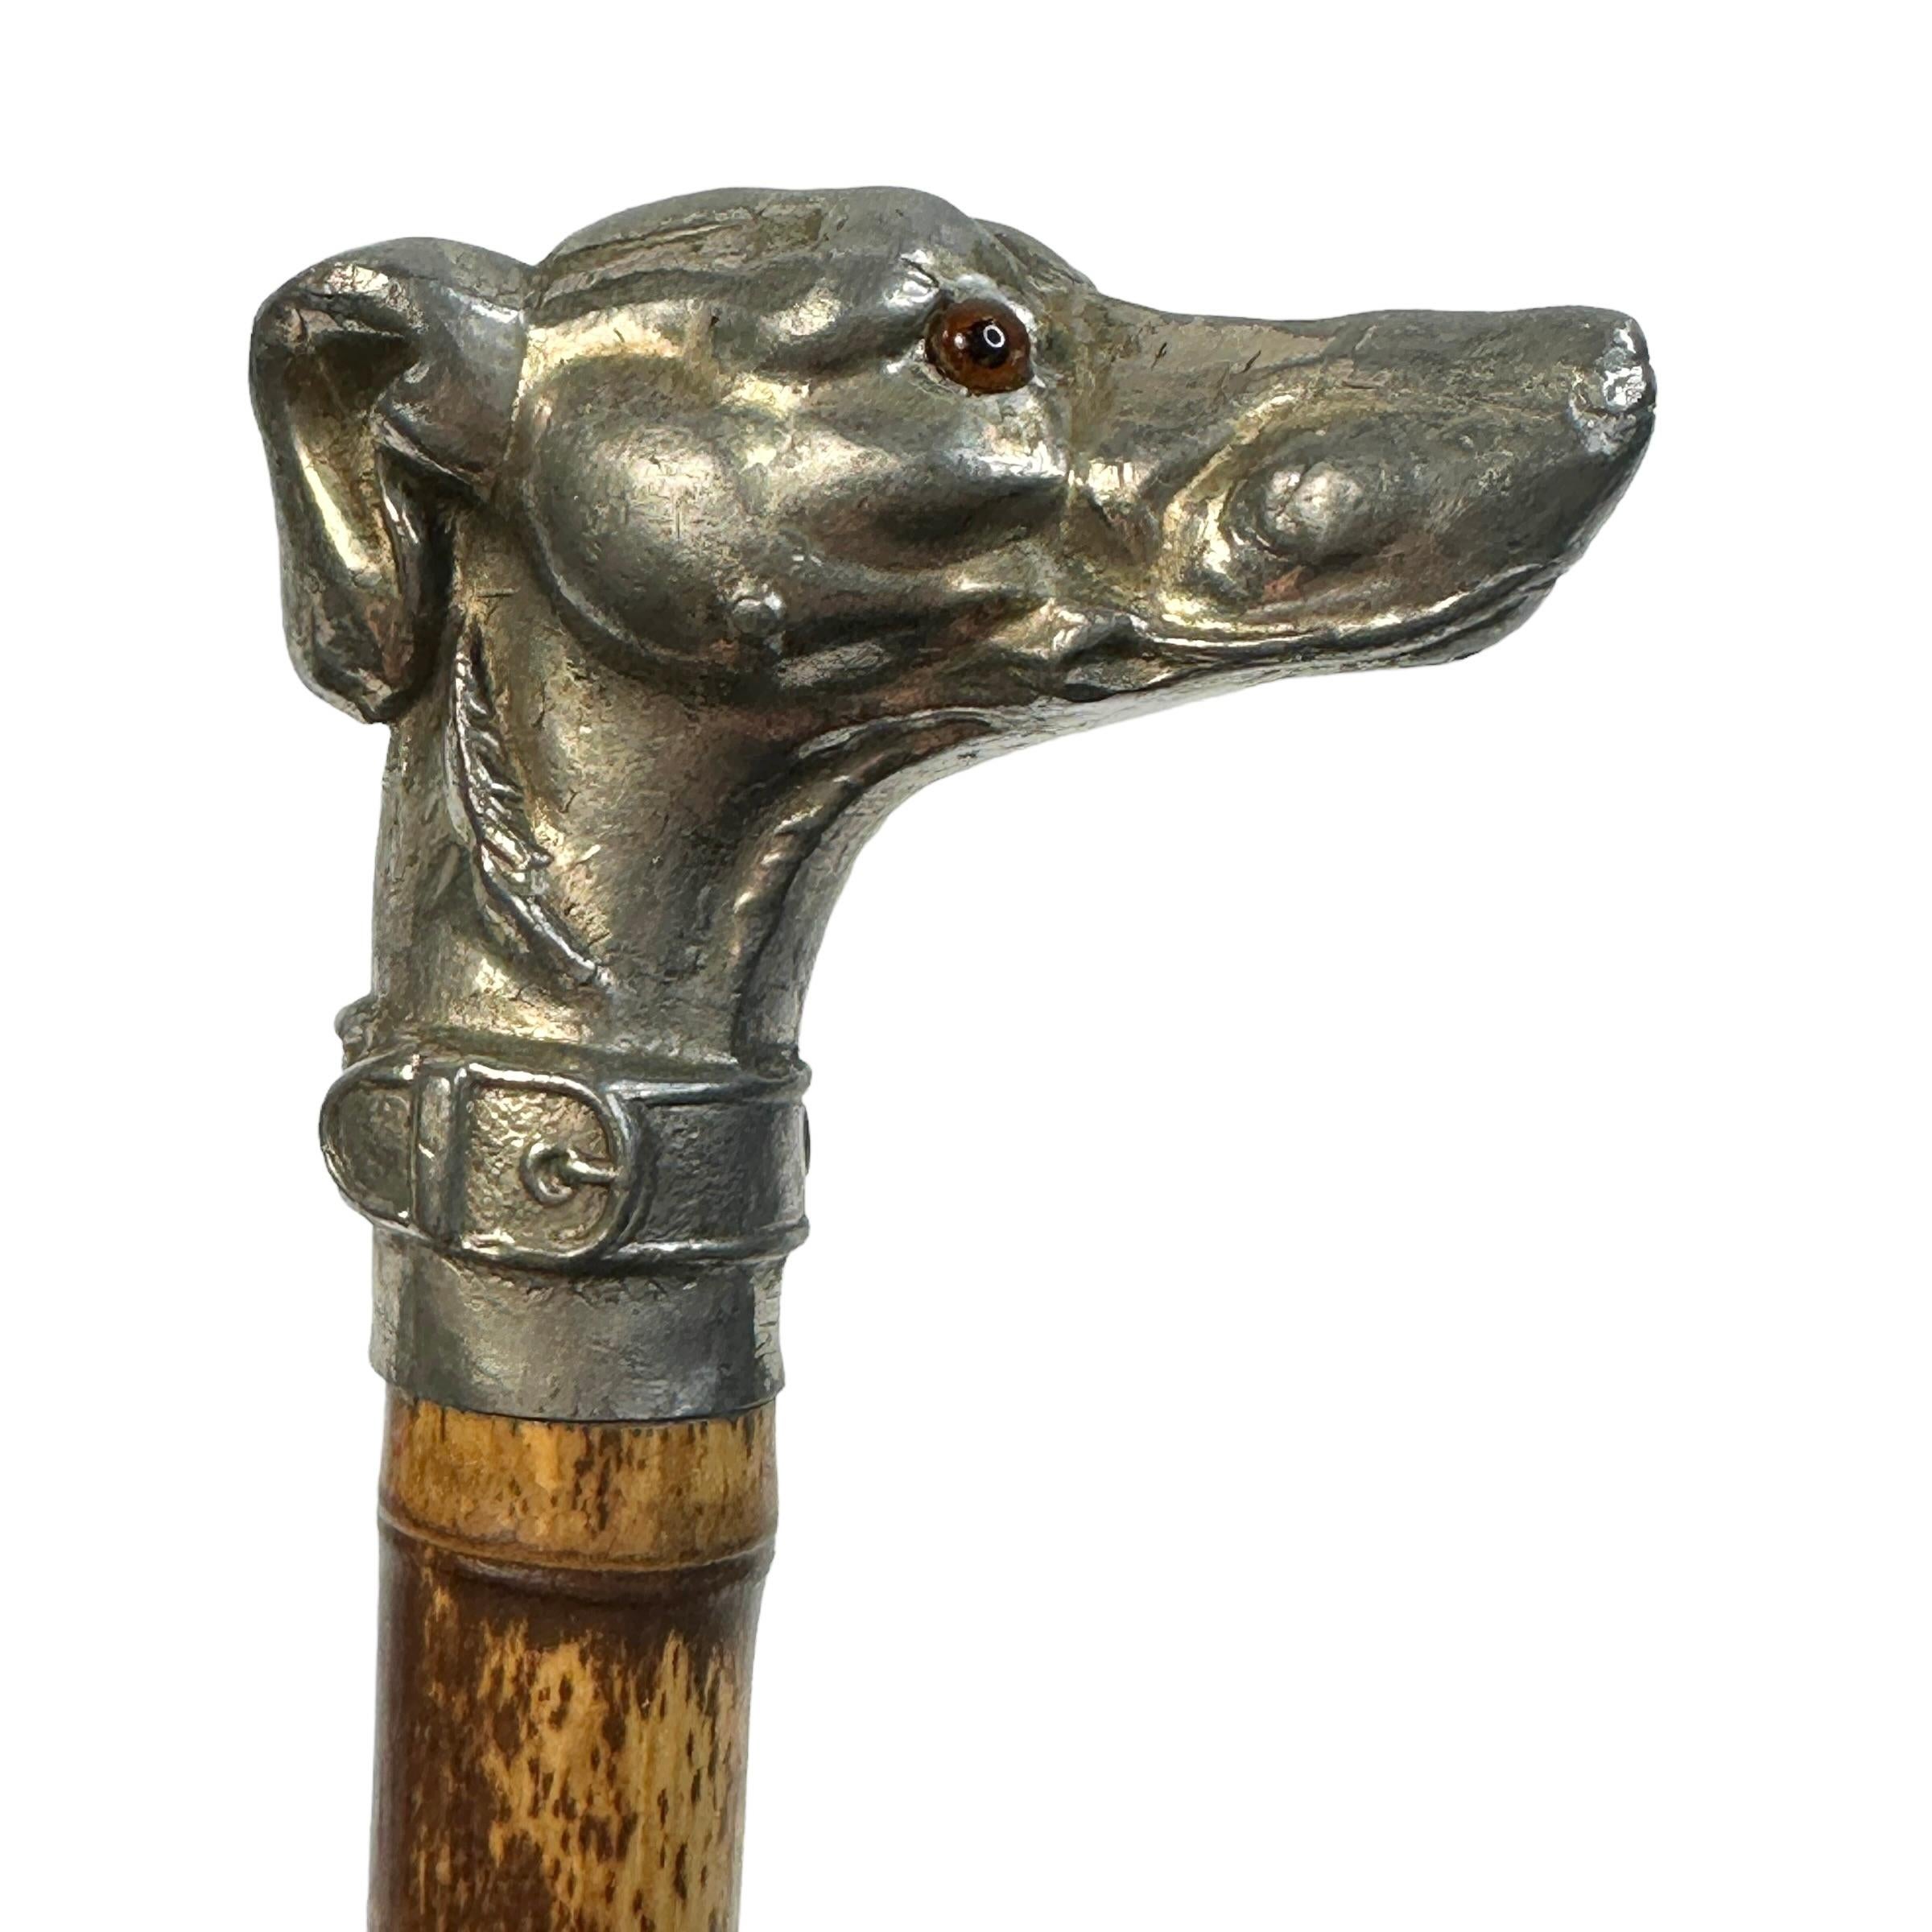 Beautiful pewter and bamboo dog head walking stick. Manufactured in the Vienna Austria at the end of the 19th century. Wonderfully expressive representation of a whippet or greyhound dog. Classic made with glass eyes. Purchased at an Estate Sale in